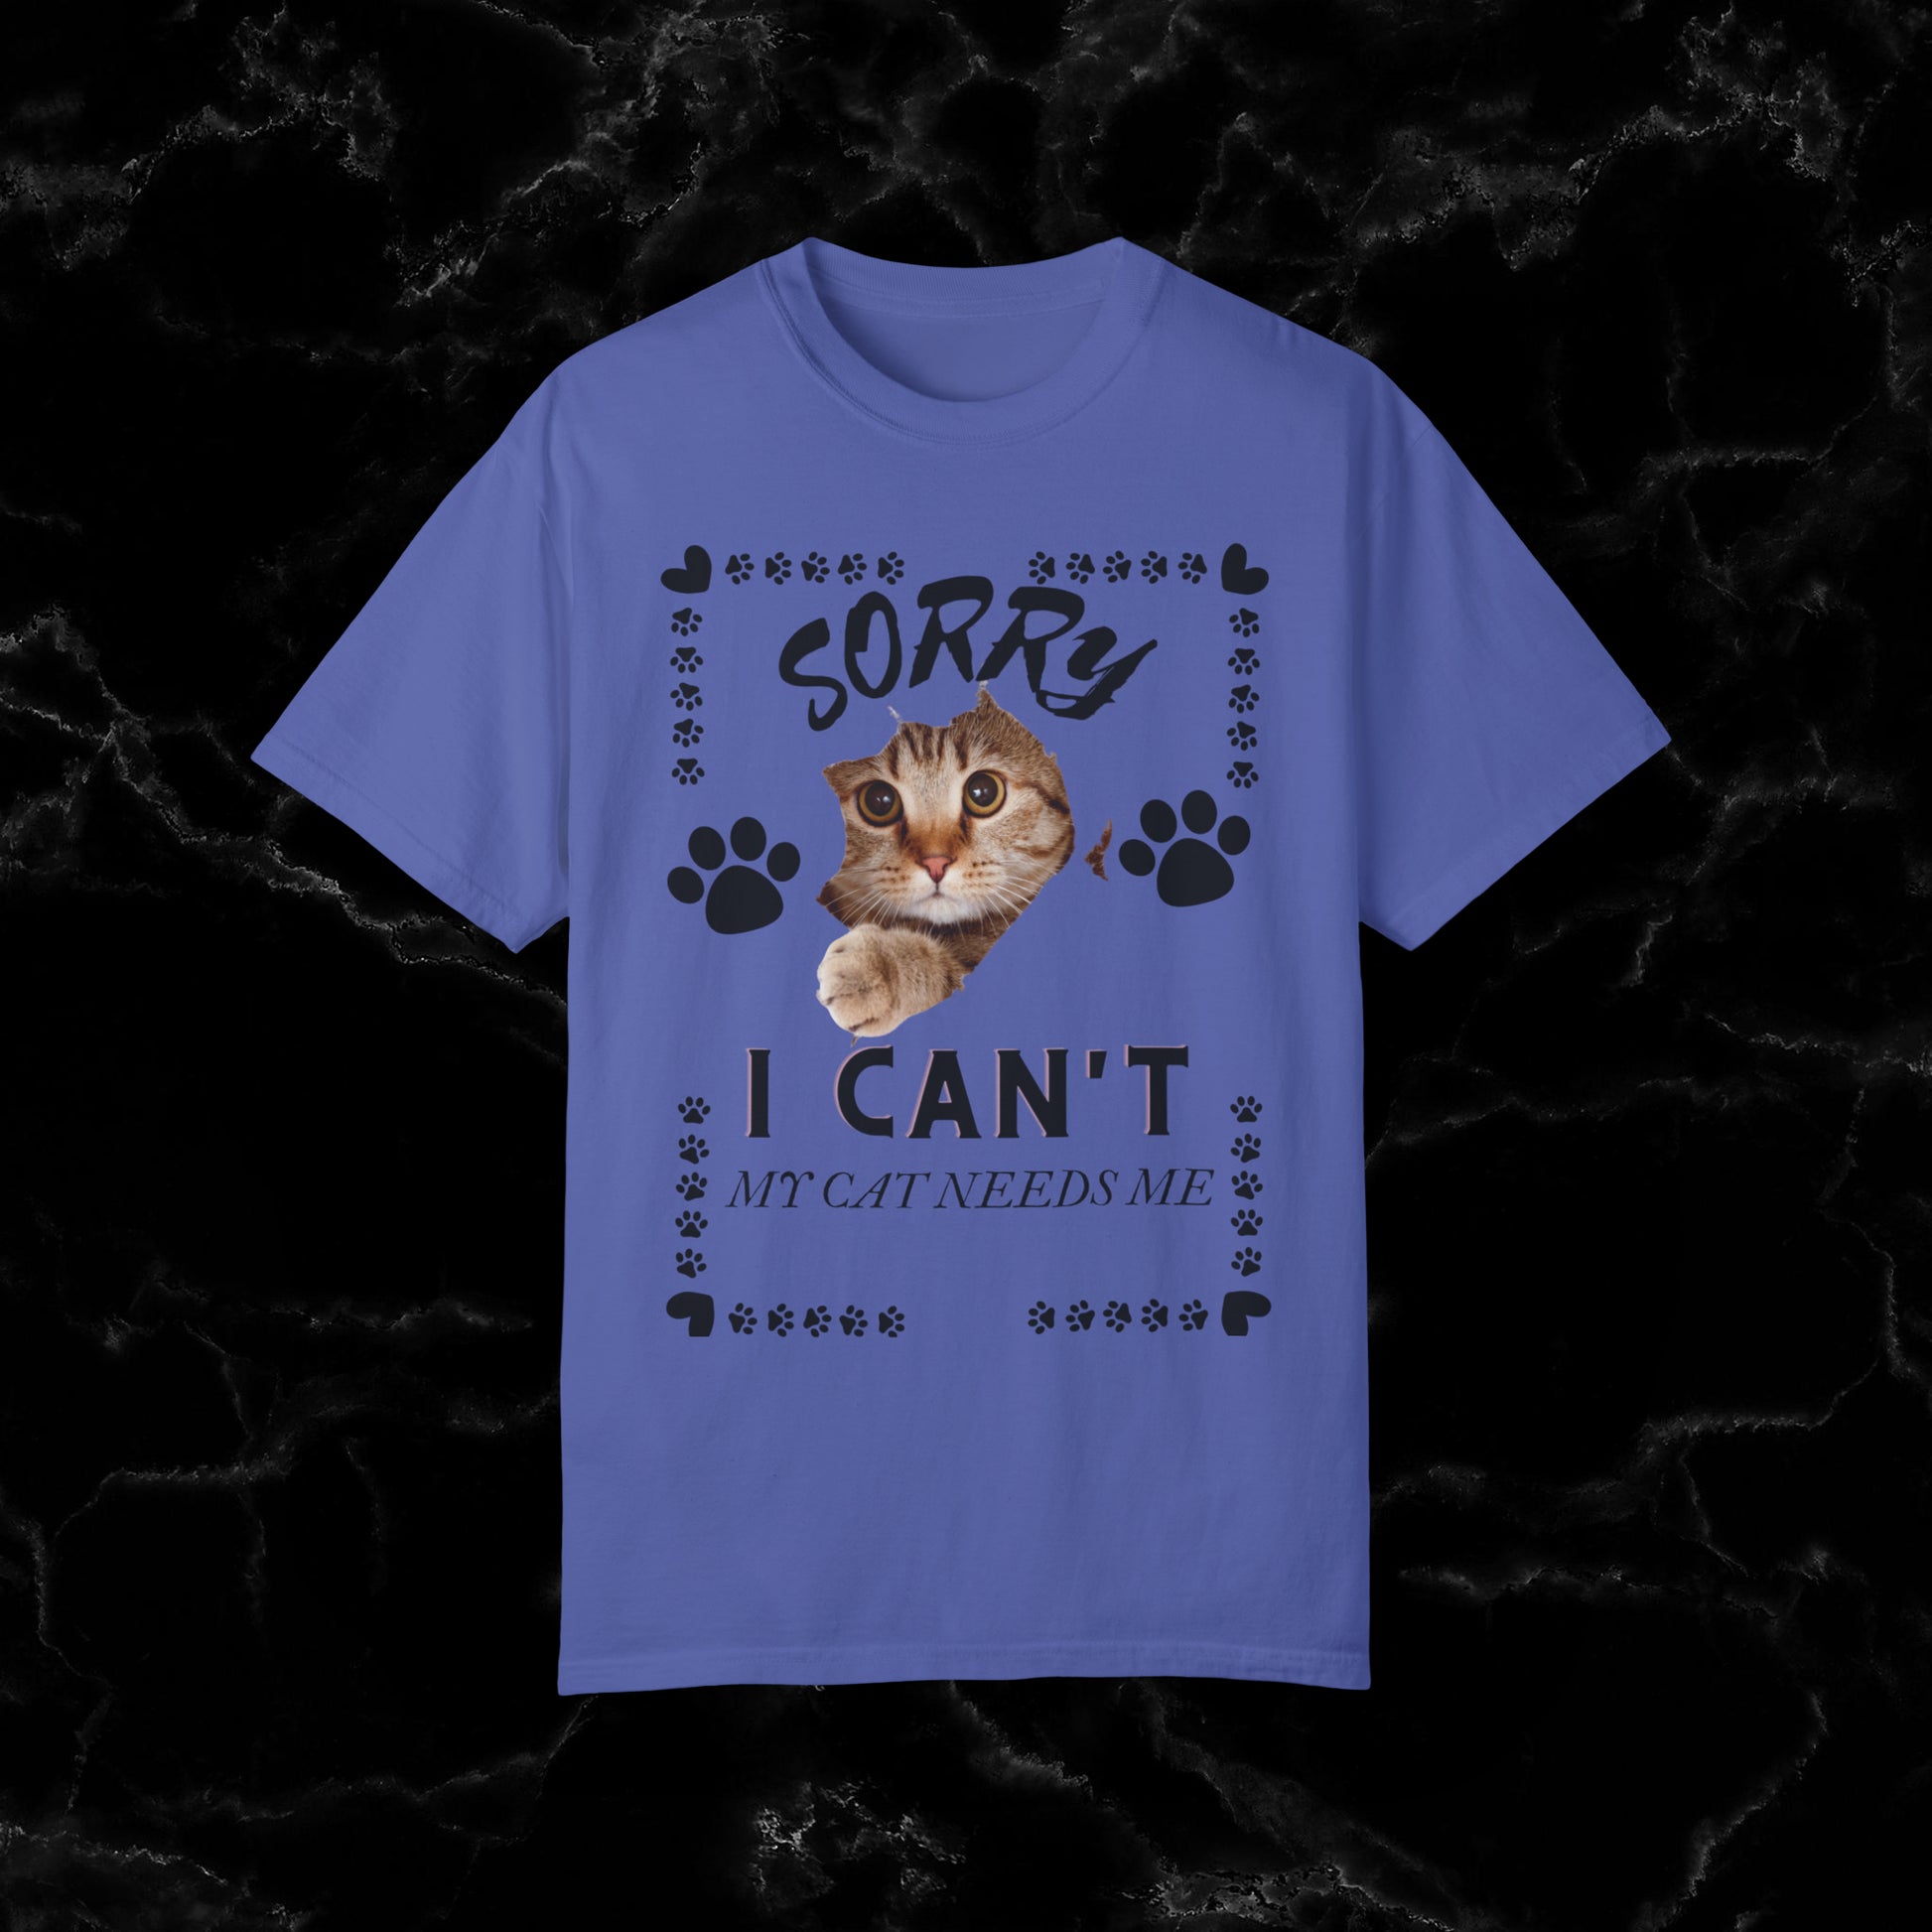 Sorry I Can't, My Cat Needs Me T-Shirt - Perfect Gift for Cat Moms and Animal Lovers T-Shirt Periwinkle S 